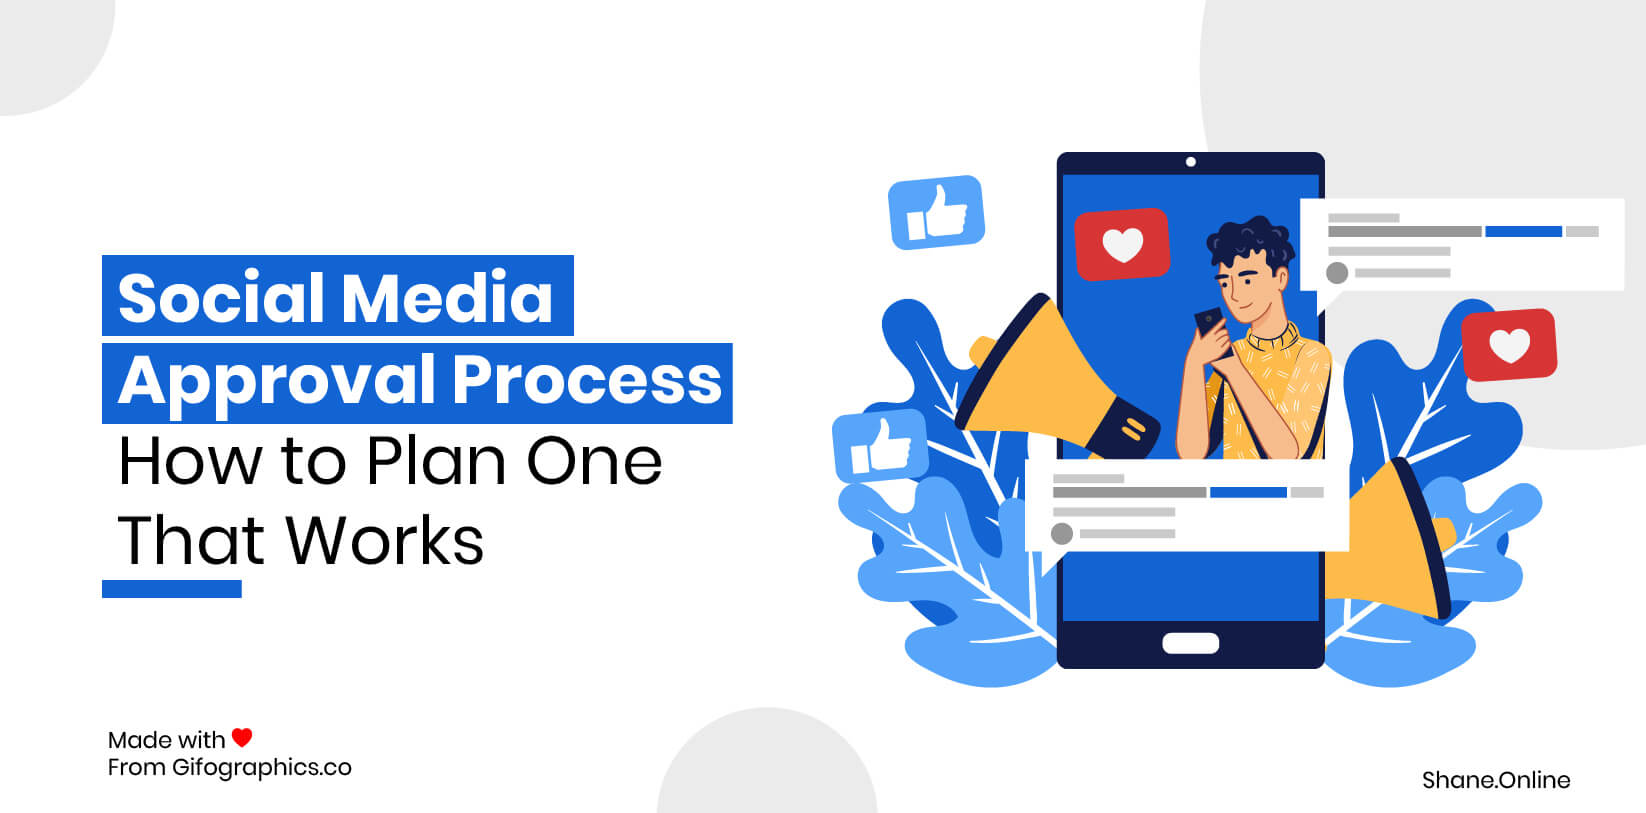 social media approval process: how to plan one that works